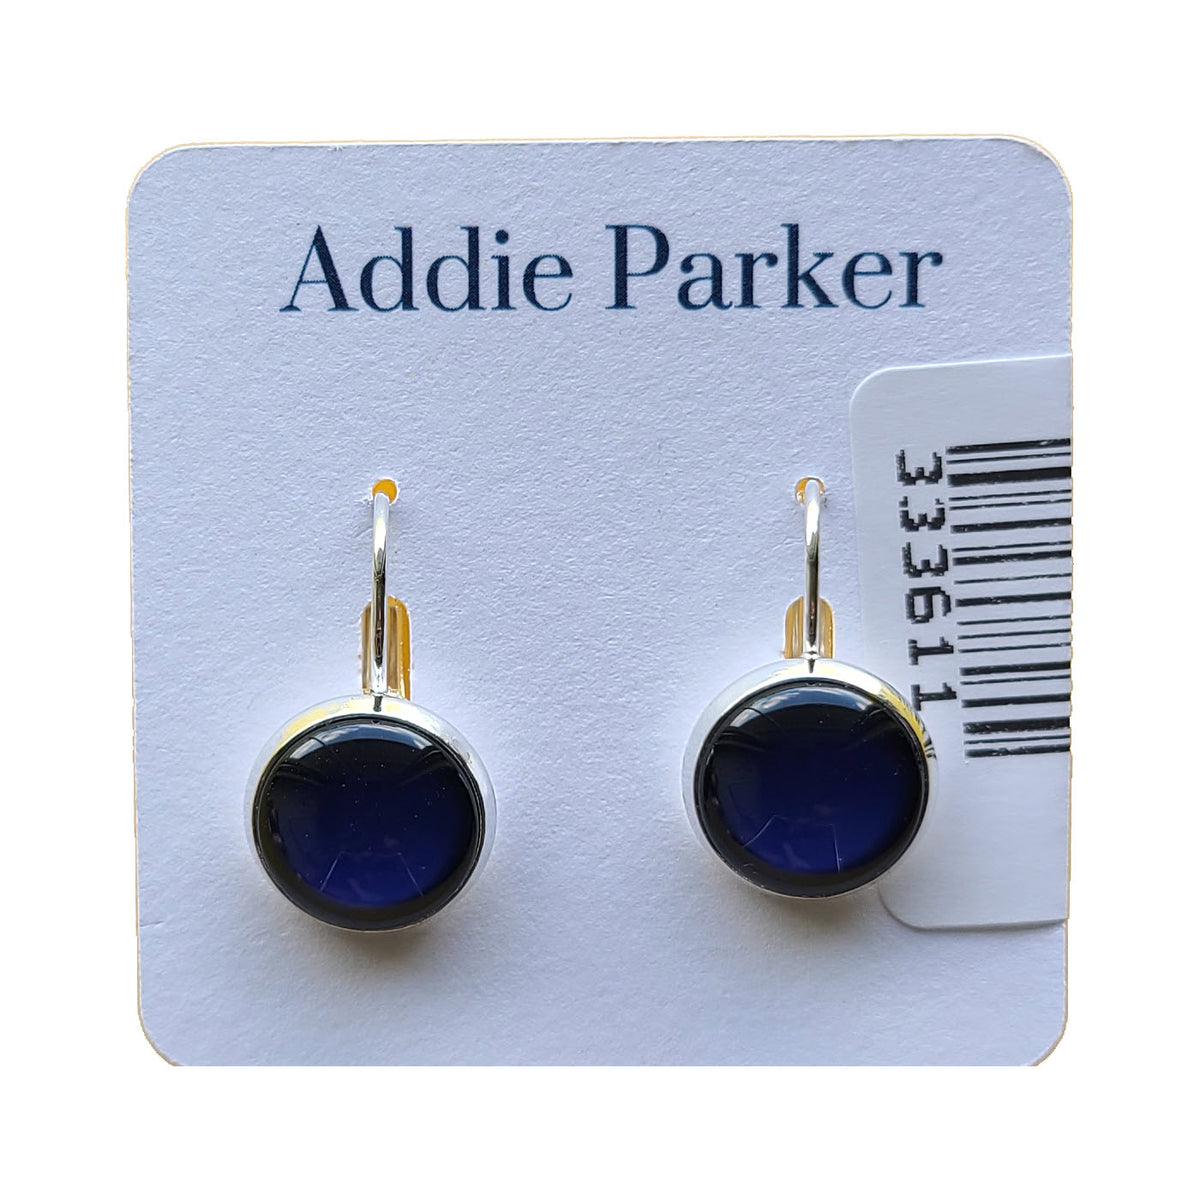 A pair of round navy solid Addie Parker earrings mounted on a white Addie Parker jewelry card.